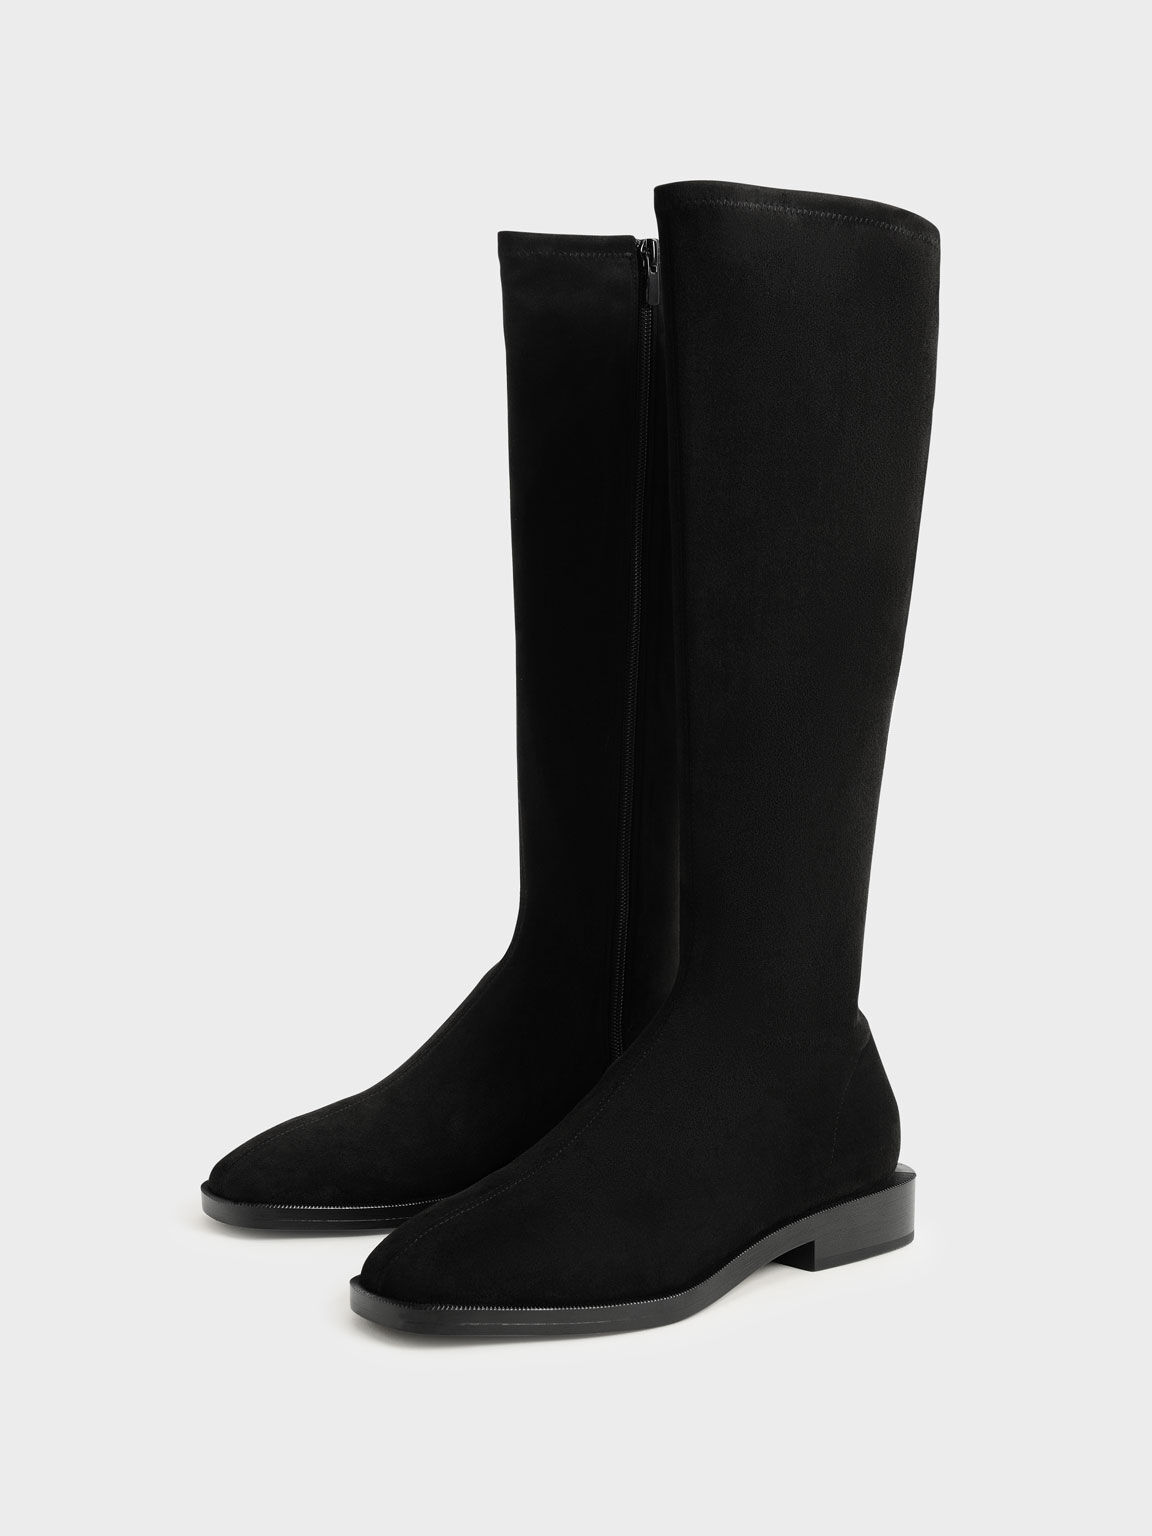 Black Textured Textured Knee High Flat Boots - CHARLES & KEITH US